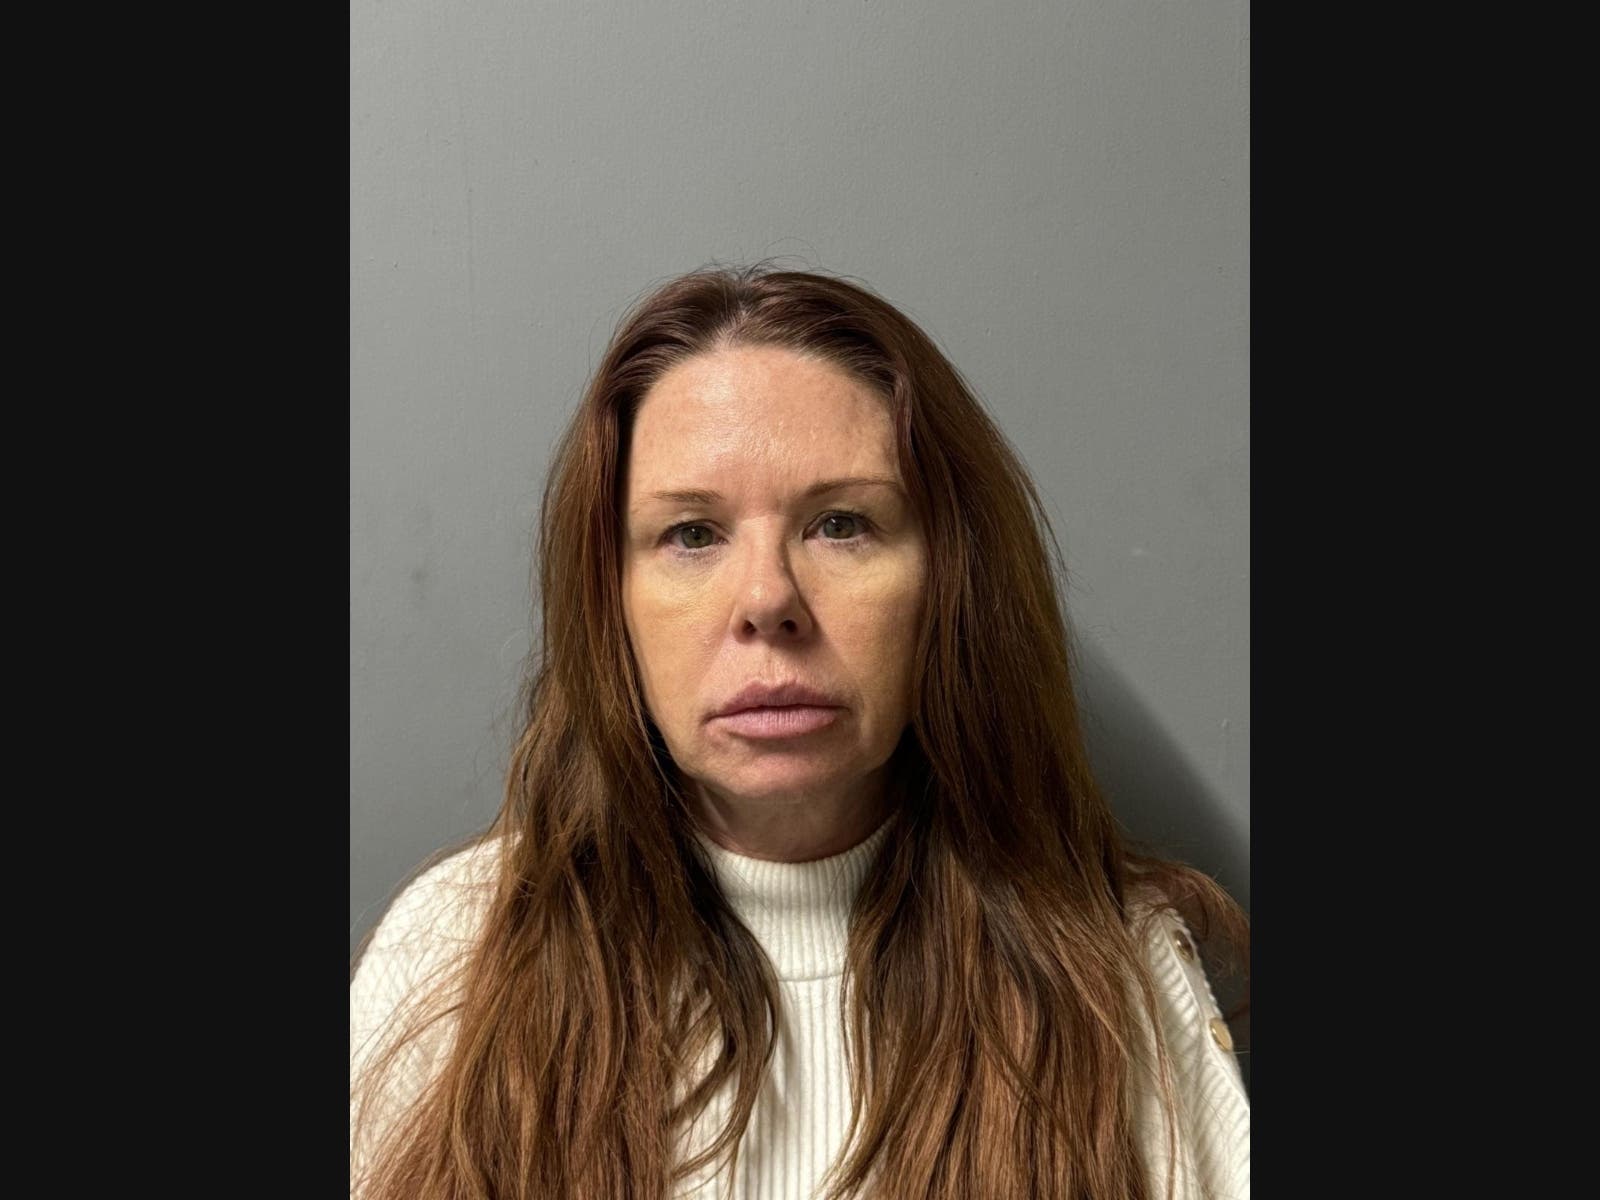 Ann Marie Goddard, 54, of Charlestown, the co-owner of Exodus Construction in Narragansett, was charged with embezzlement and fraudulent conversion, unlawful appropriation, and obtaining money/property by false pretenses or impersonation. 